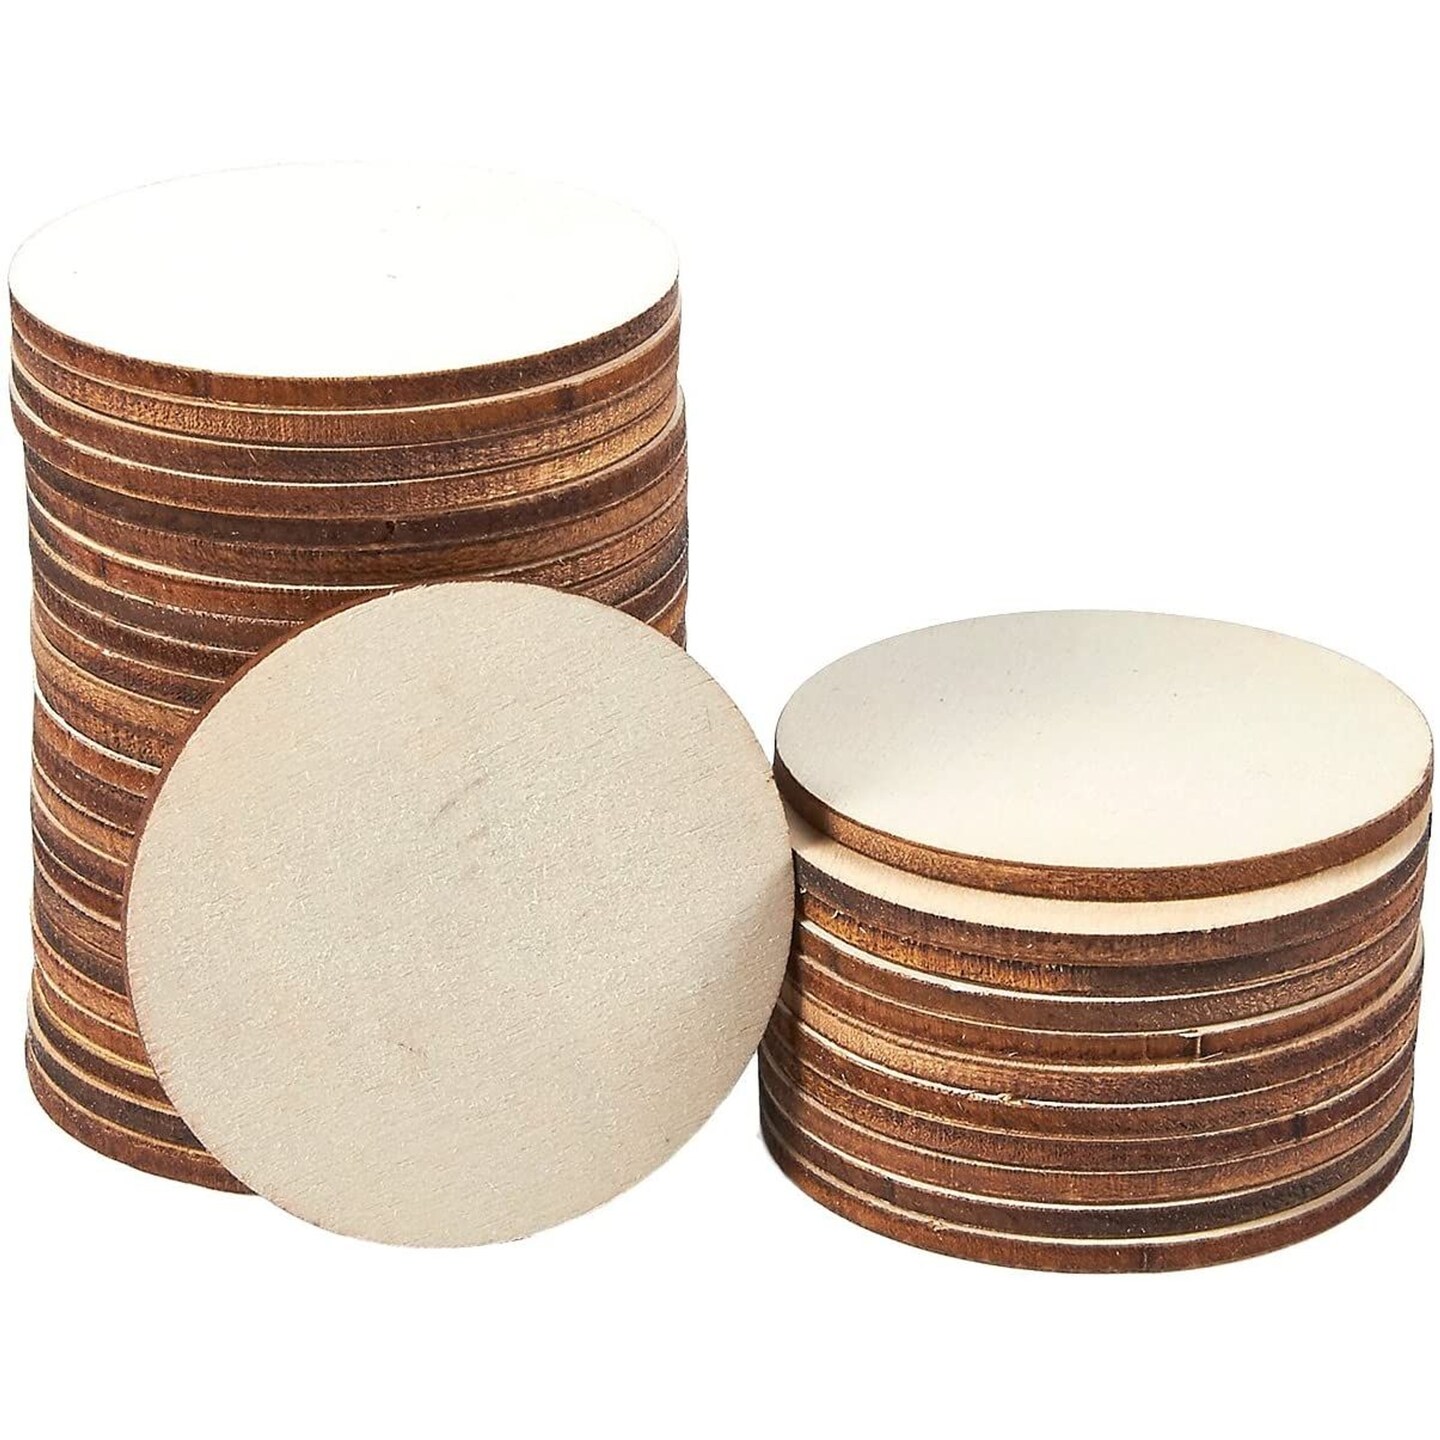 Juvale 8-pack Unfinished Wood Round Circle Cutouts, 12 Inch Wooden Discs  For Crafts Projects, Door Hangers, Wood Burning, Painting, Home Decor, 12  In : Target